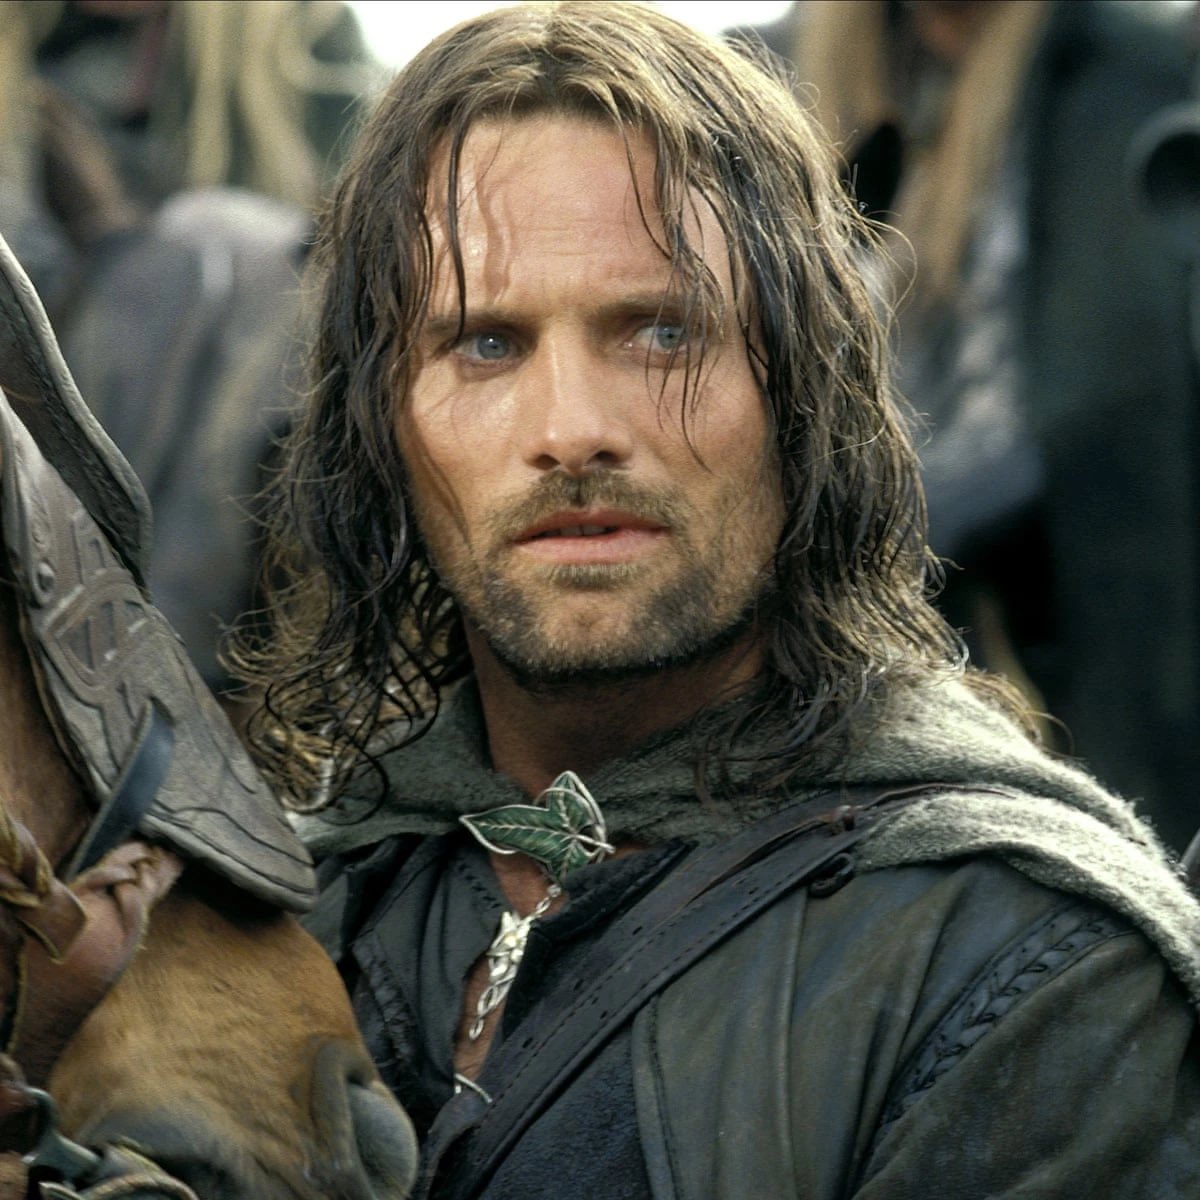 Aragorn is the perfect literary example of masculine balance.

He’s gentle and kind and tender, while also being strong and good and valiant.

Men often make the mistake of thinking women adore Aragorn for his strength in battle or his ability to command an army, but it’s